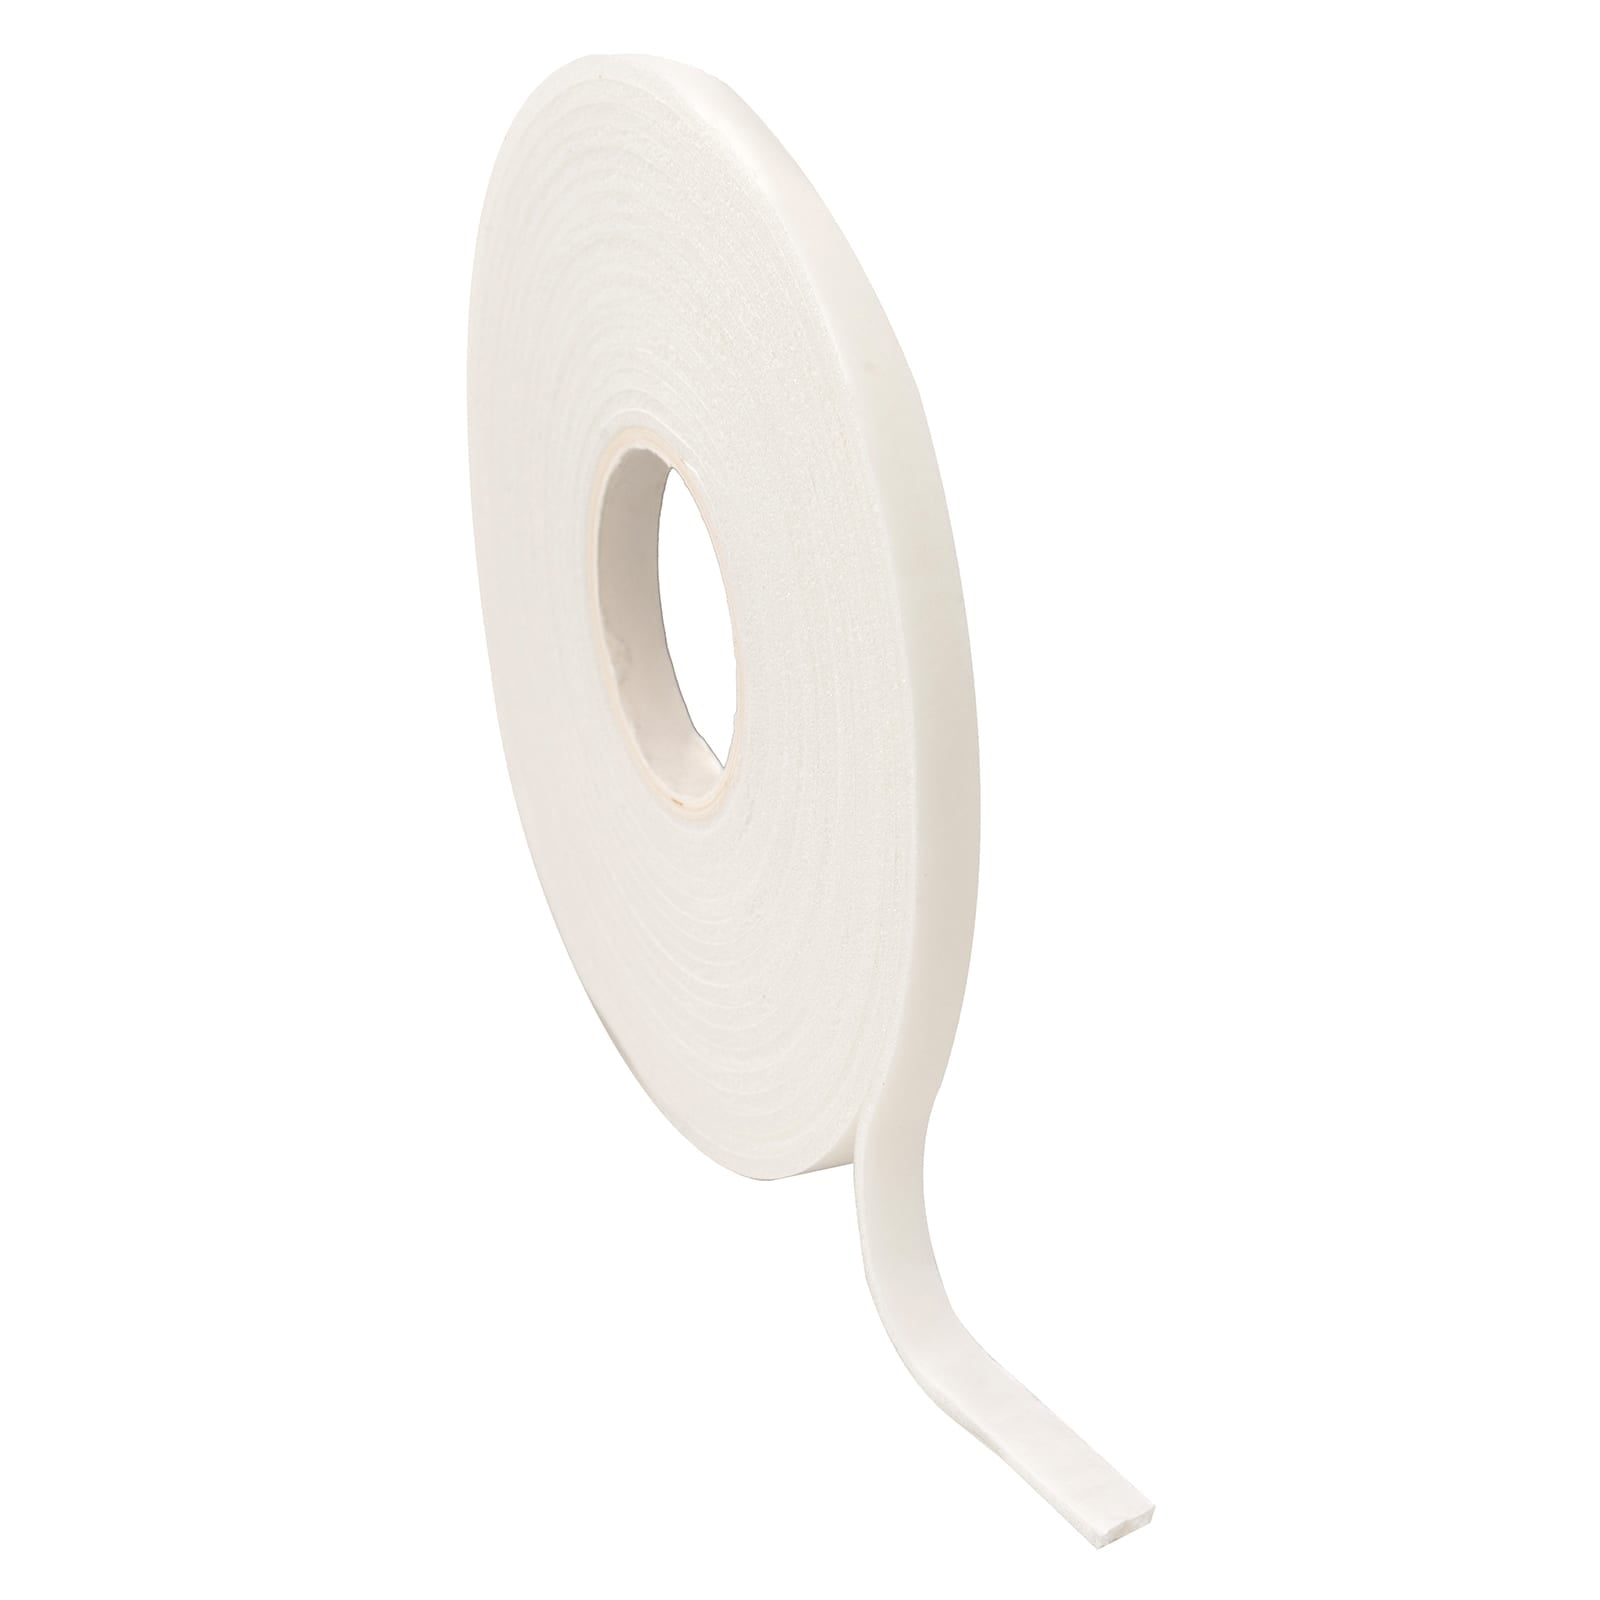 1/4 x 4yd. Double-Sided Foam Tape by Recollections™